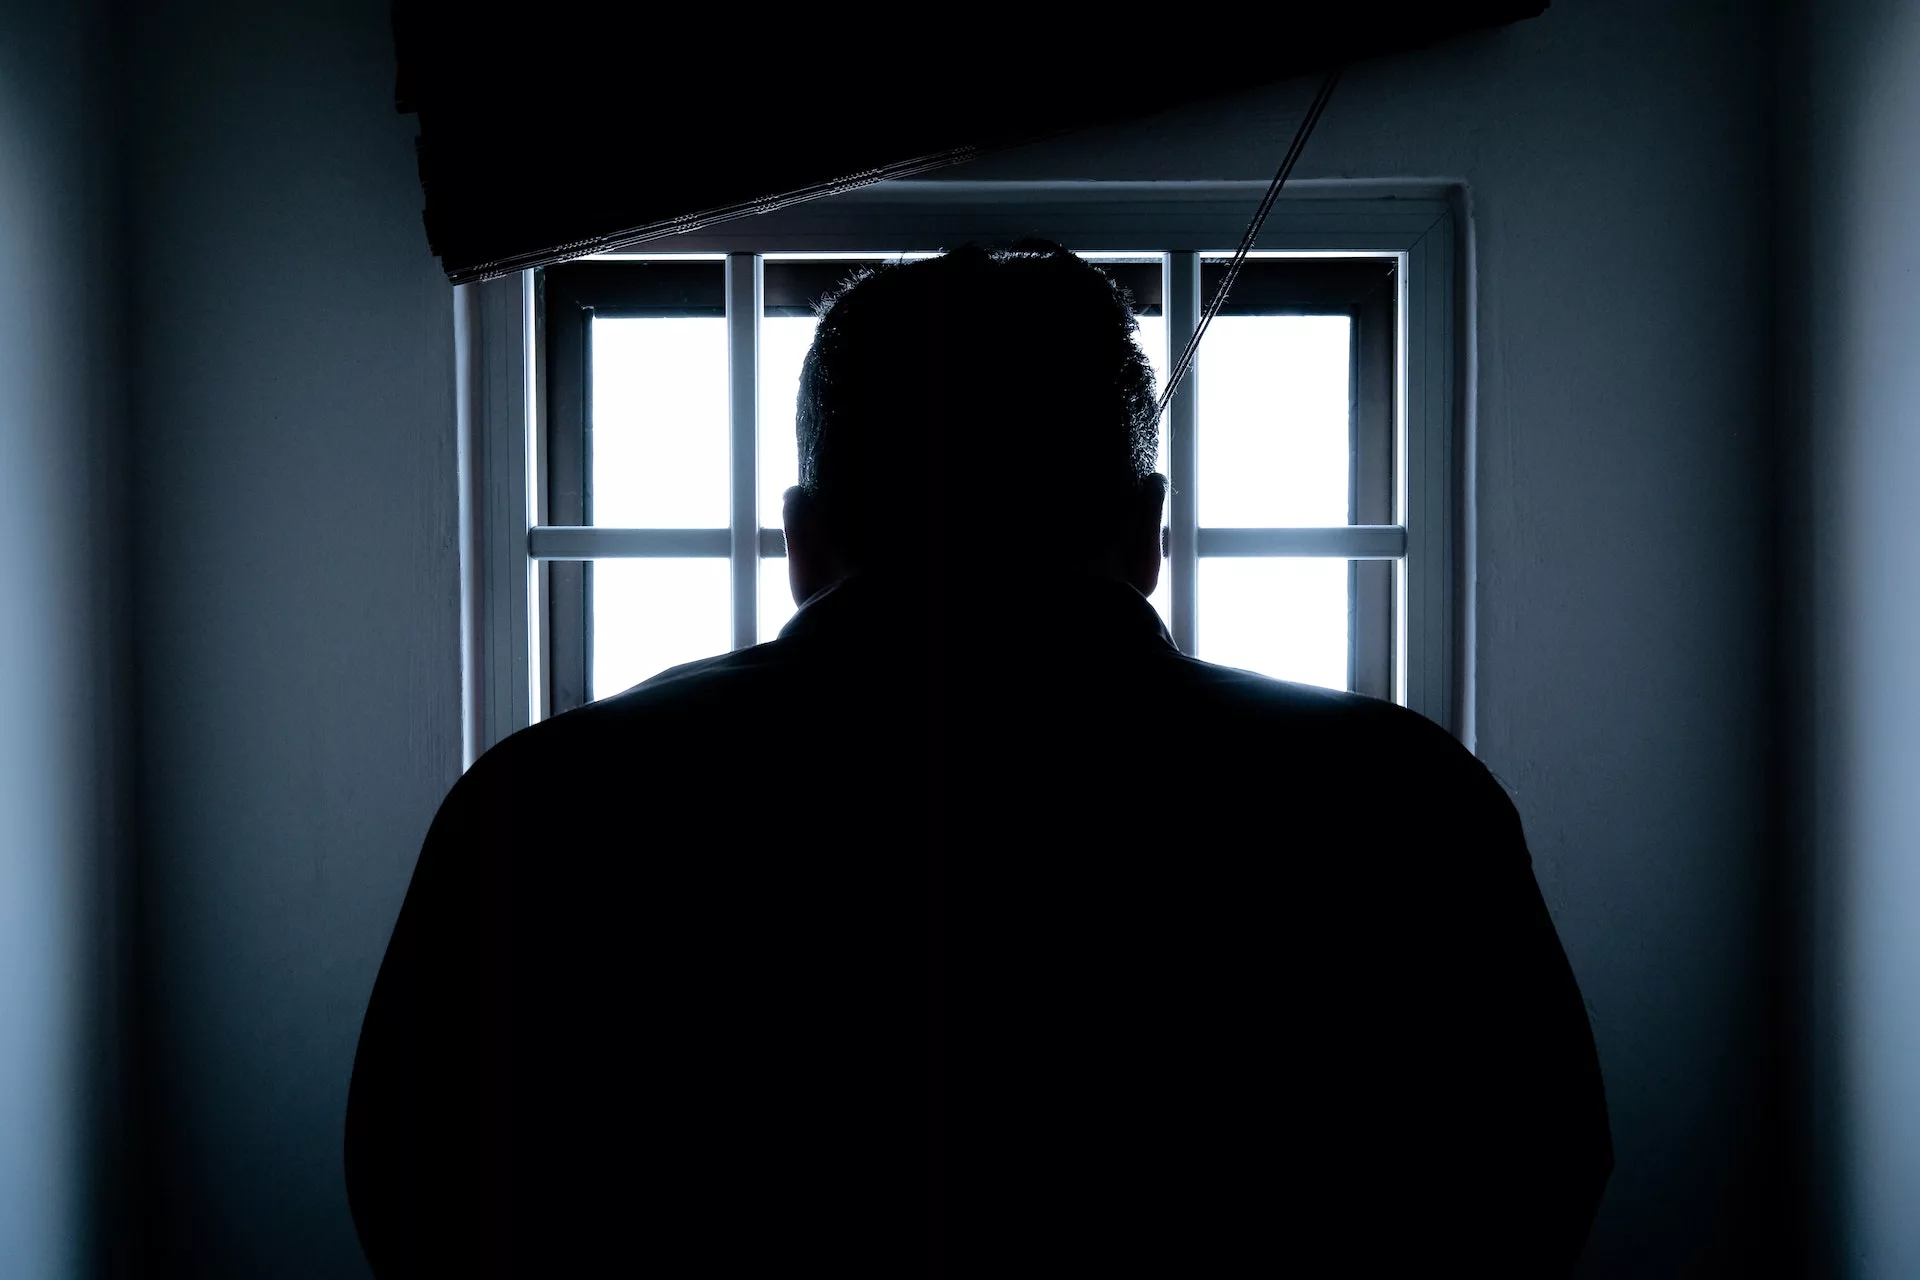 This photo shows the black silhouette of a man from behind staring out a window.